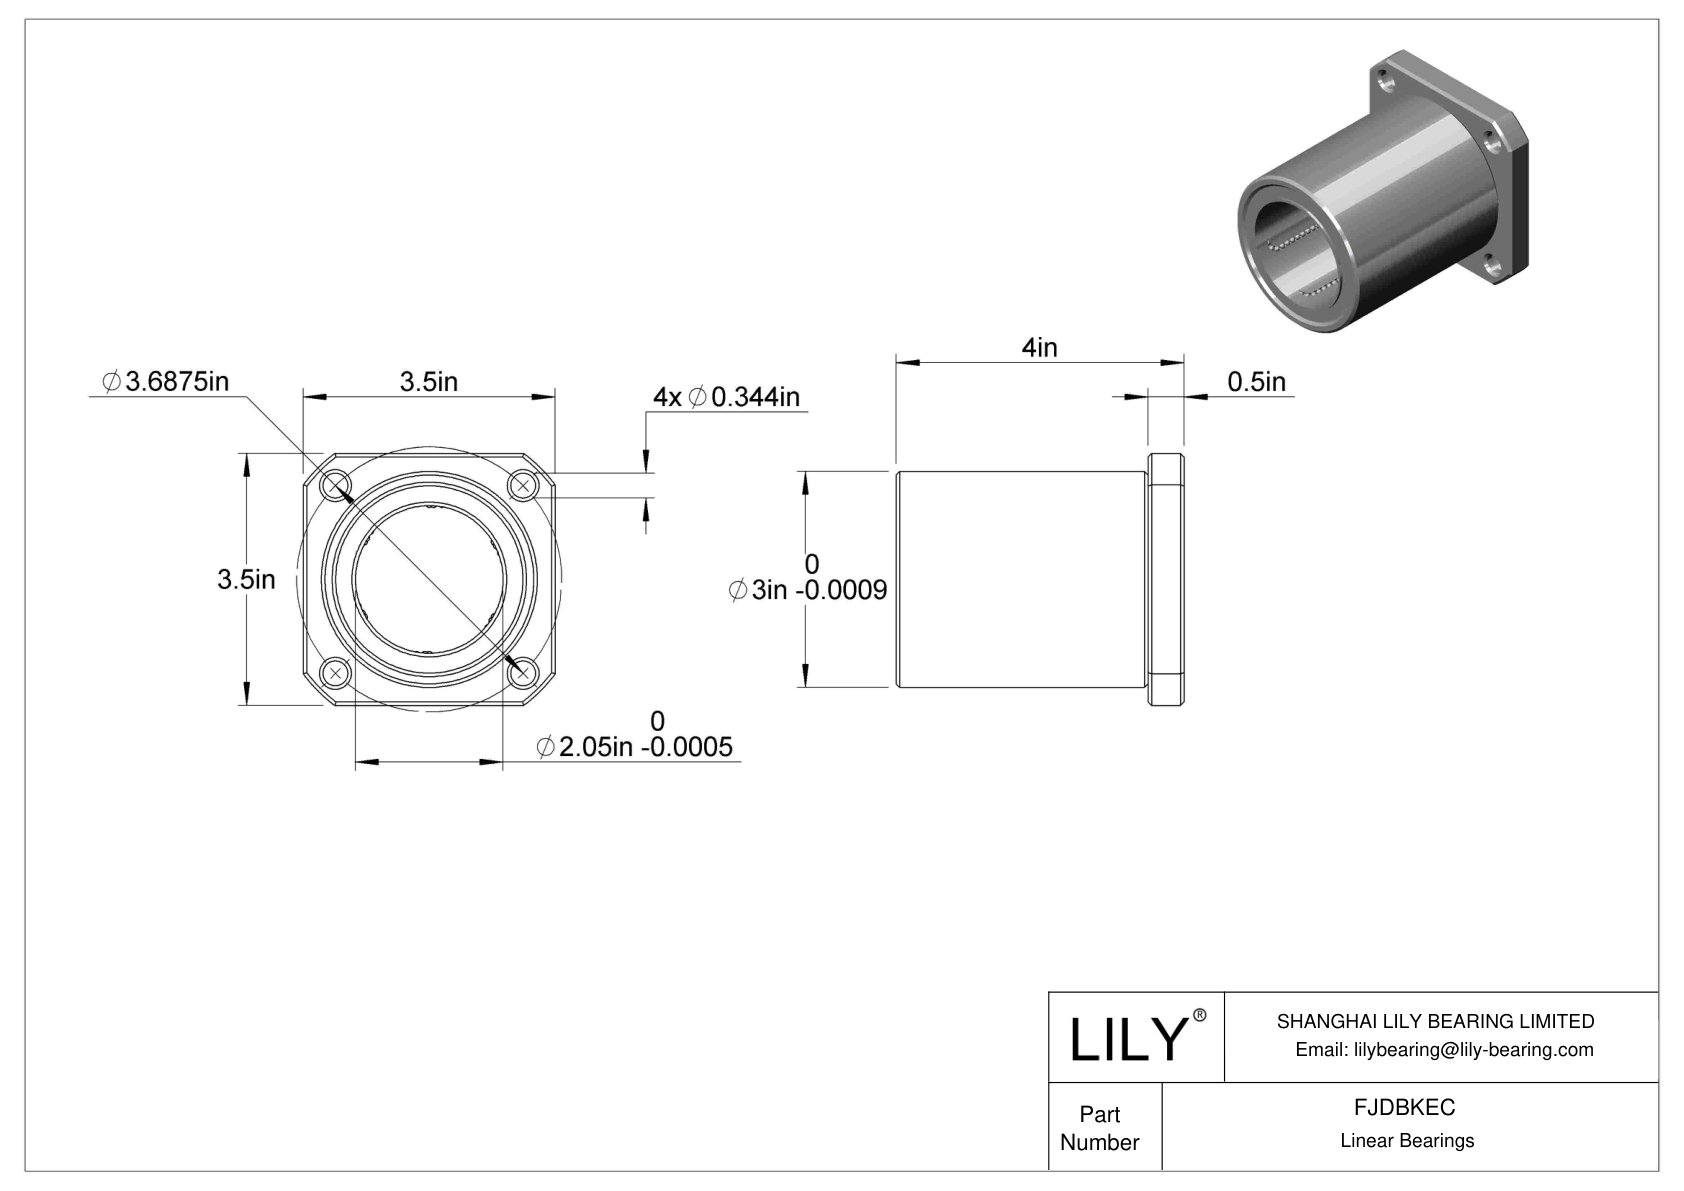 FJDBKEC Corrosion-Resistant Flange-Mounted Linear Ball Bearings cad drawing